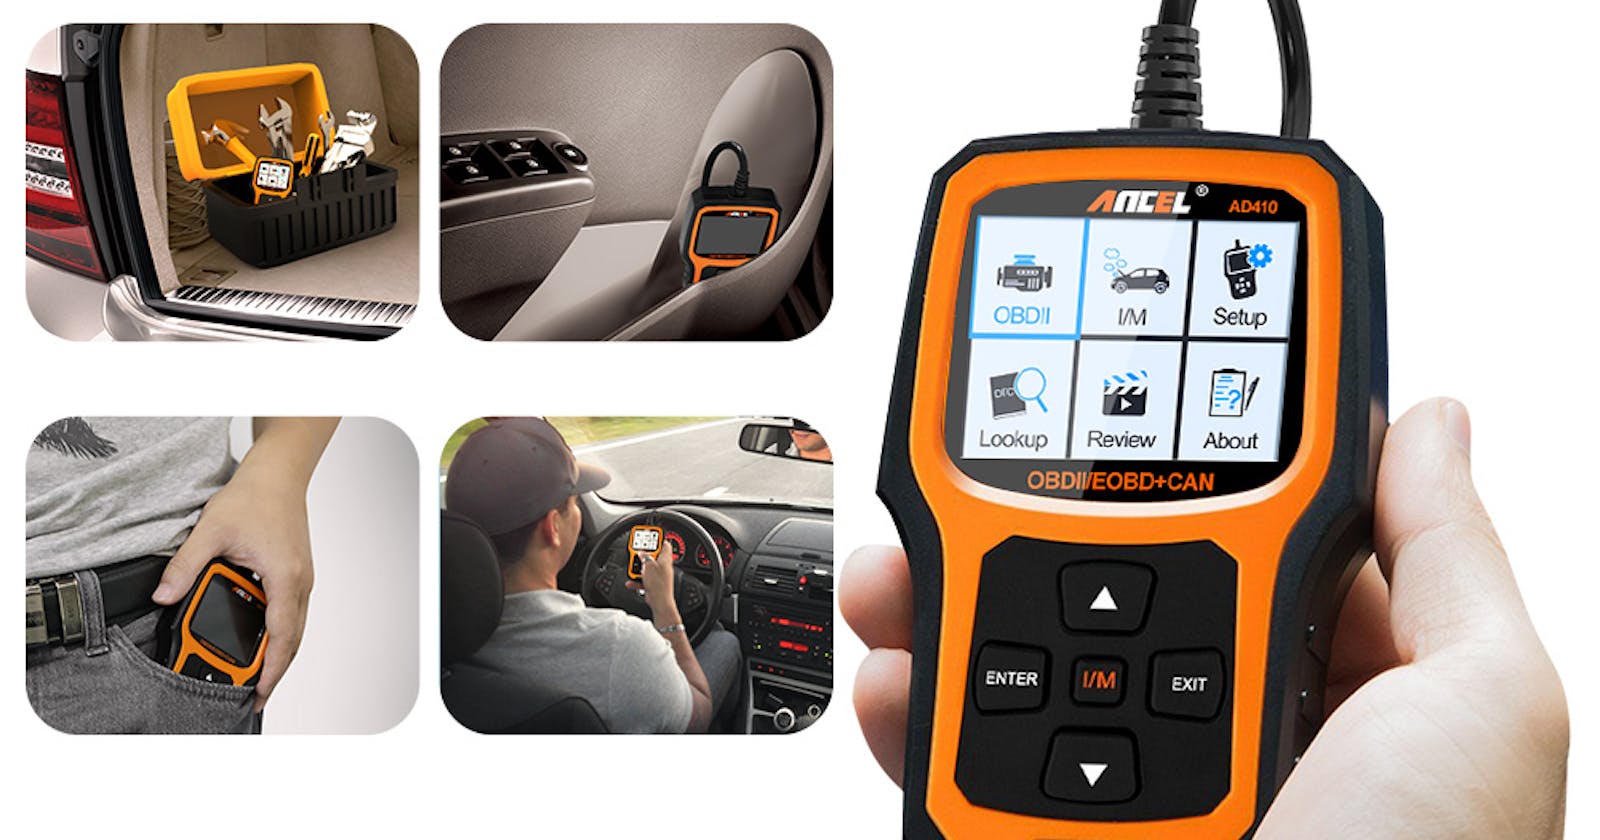 Save Time and Money: DIY Car Repairs with the Ancel OBD2 Scanner